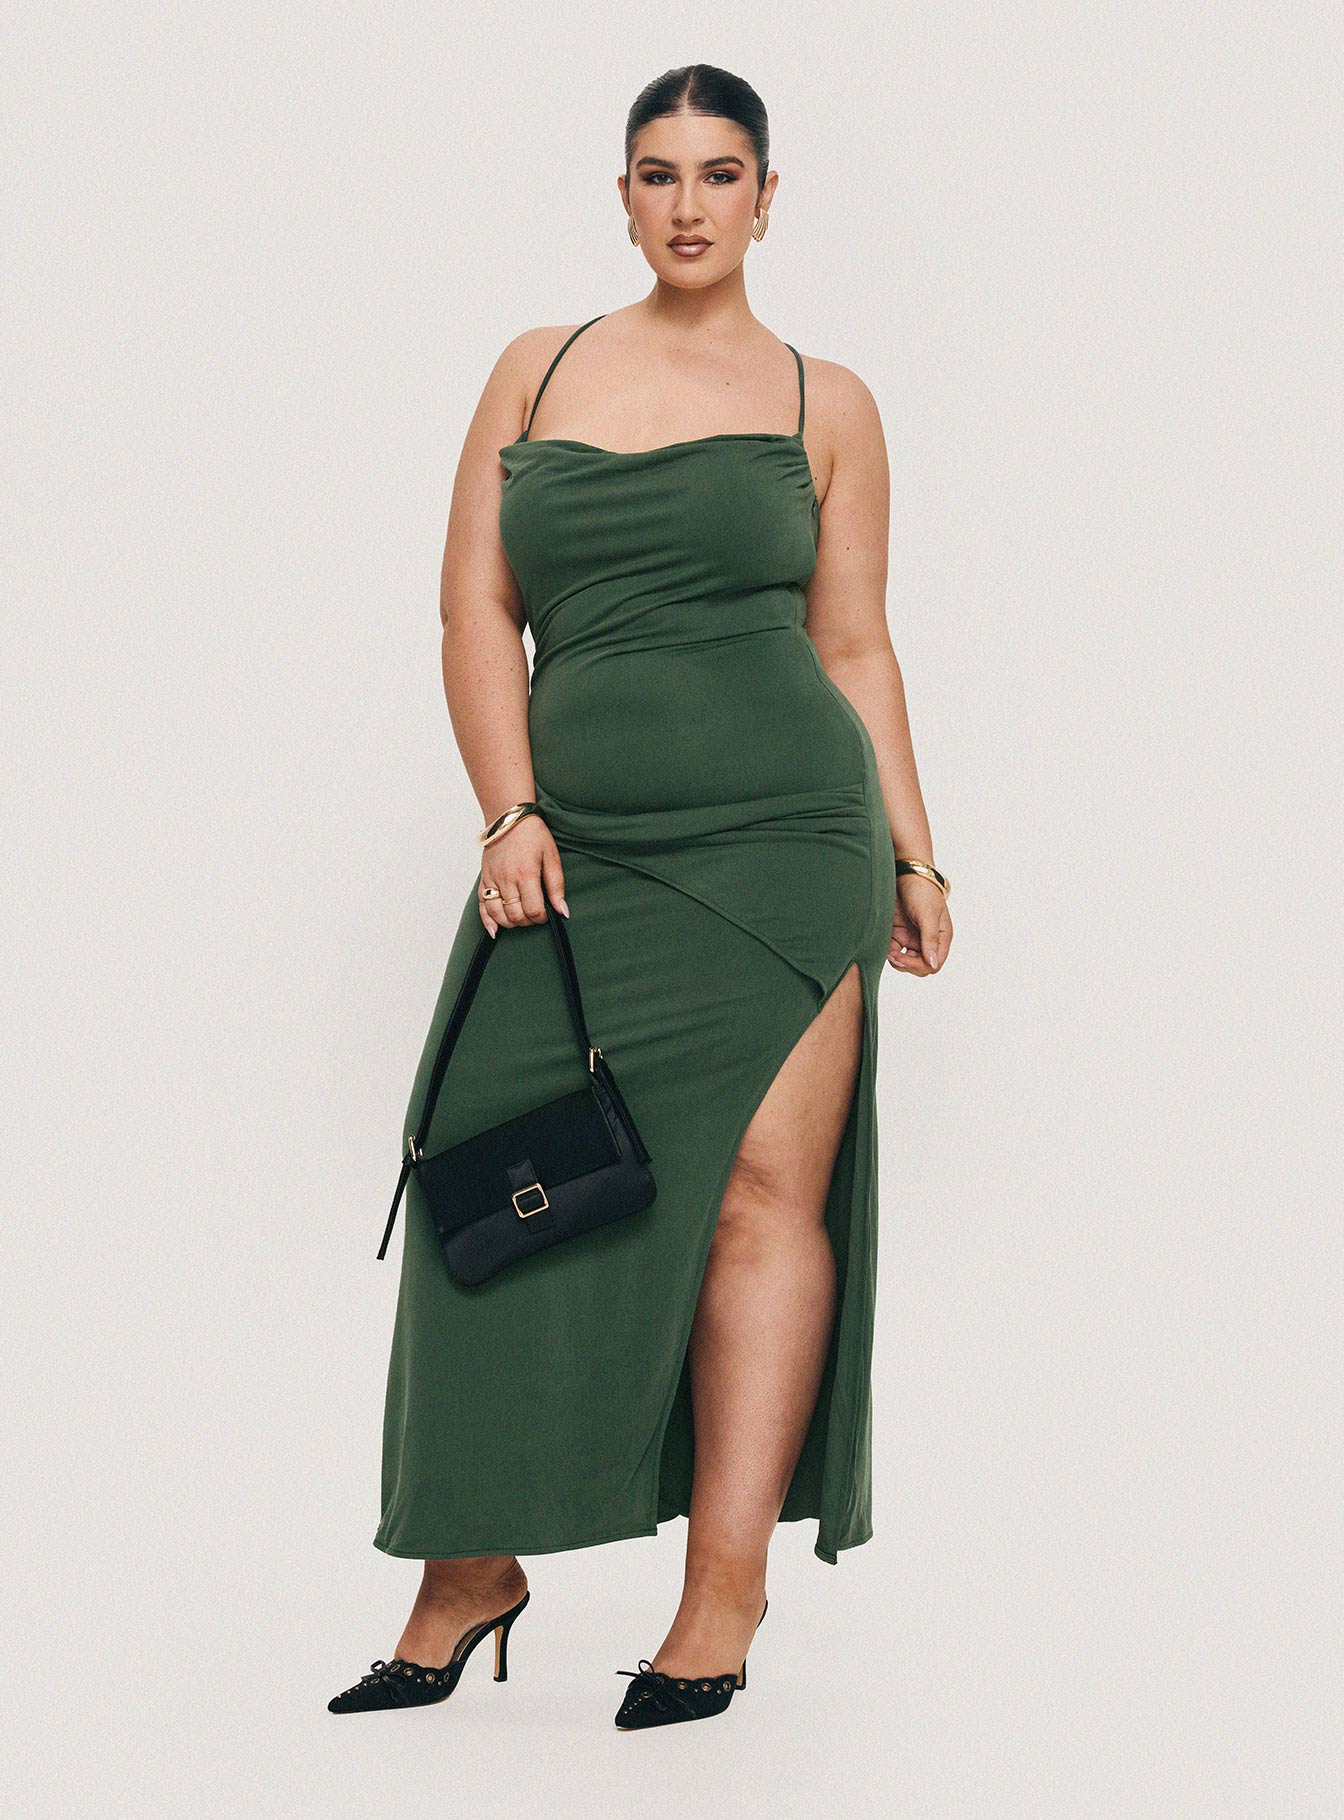 Shop Formal Dress - Marchesi Cupro Maxi Dress Green Curve featured image